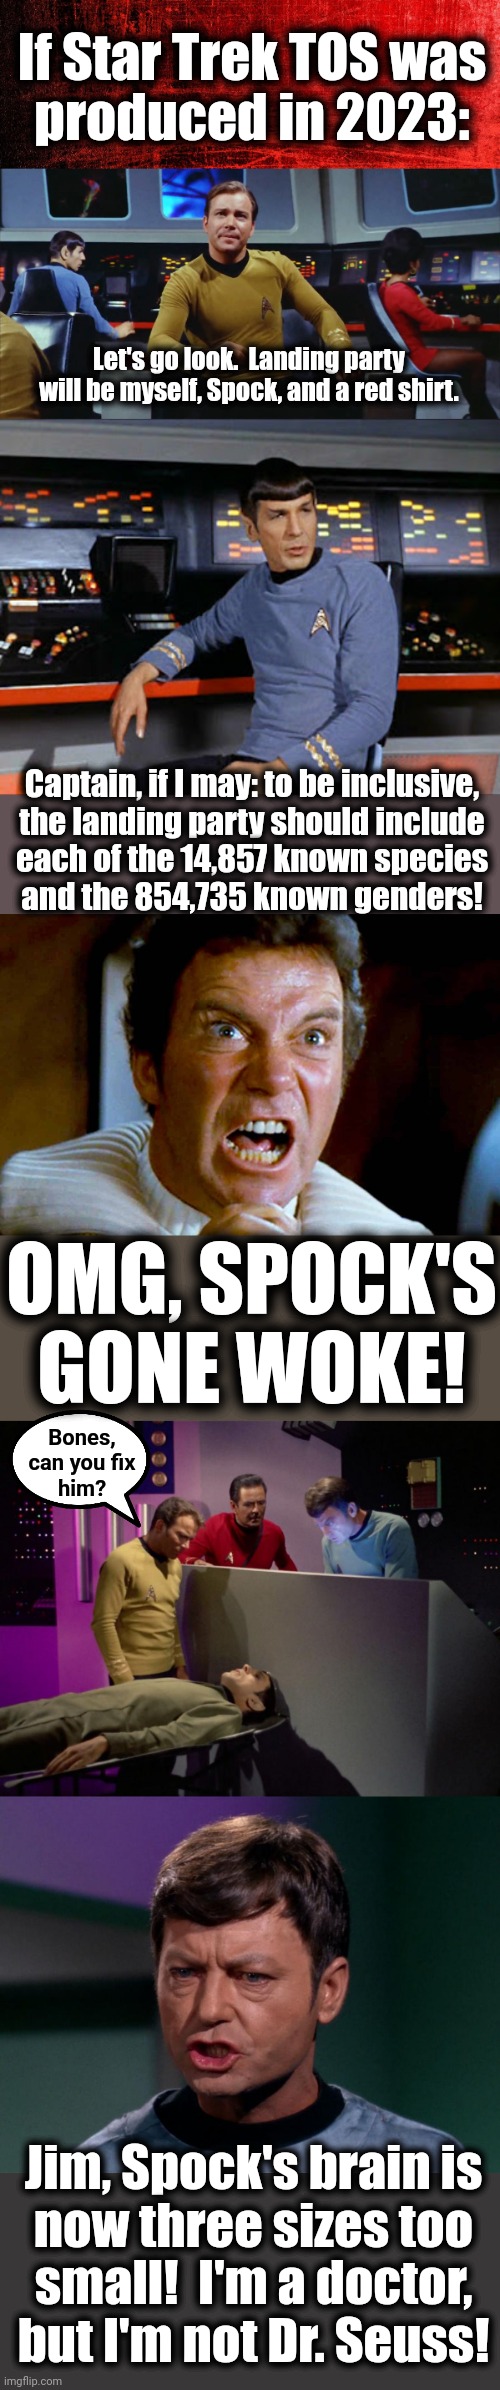 Spock goes woke | If Star Trek TOS was
produced in 2023:; Let's go look.  Landing party will be myself, Spock, and a red shirt. Captain, if I may: to be inclusive,
the landing party should include
each of the 14,857 known species
and the 854,735 known genders! OMG, SPOCK'S GONE WOKE! Bones,
can you fix
him? Jim, Spock's brain is
now three sizes too
small!  I'm a doctor, but I'm not Dr. Seuss! | image tagged in memes,star trek,spock,woke,spock's brain,doctor seuss | made w/ Imgflip meme maker